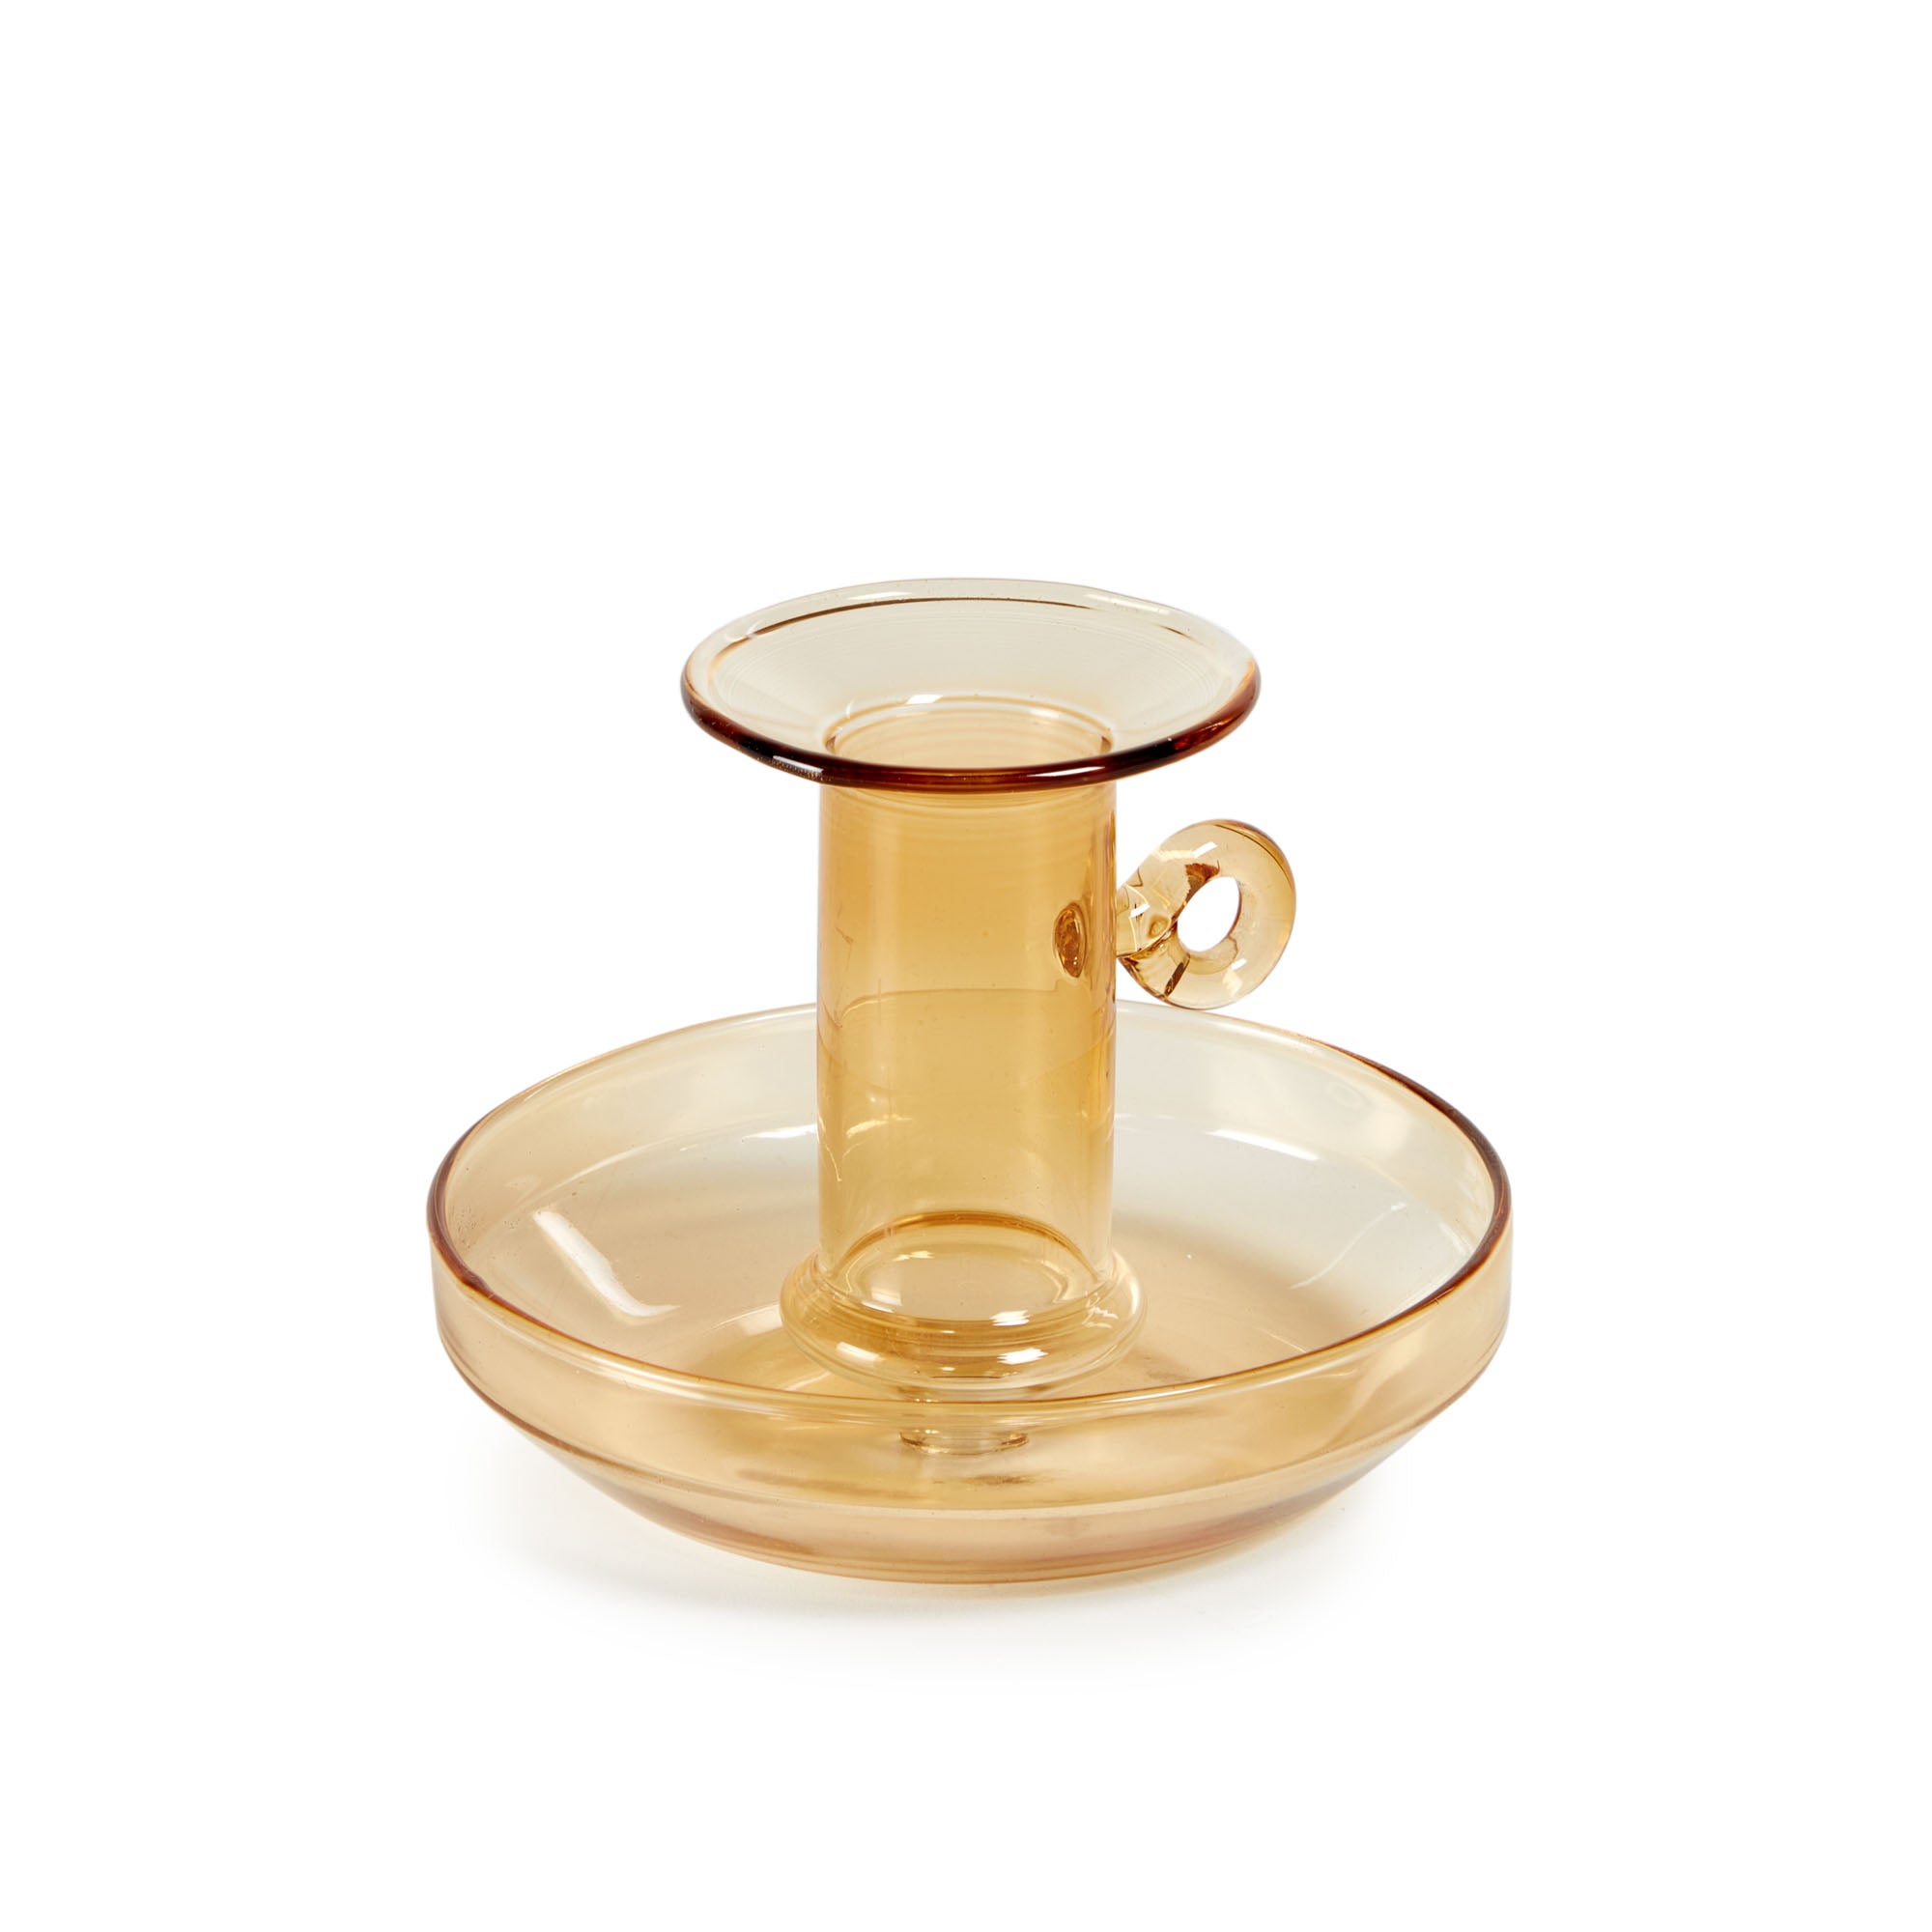 Yumalay large candle holder in orange glass